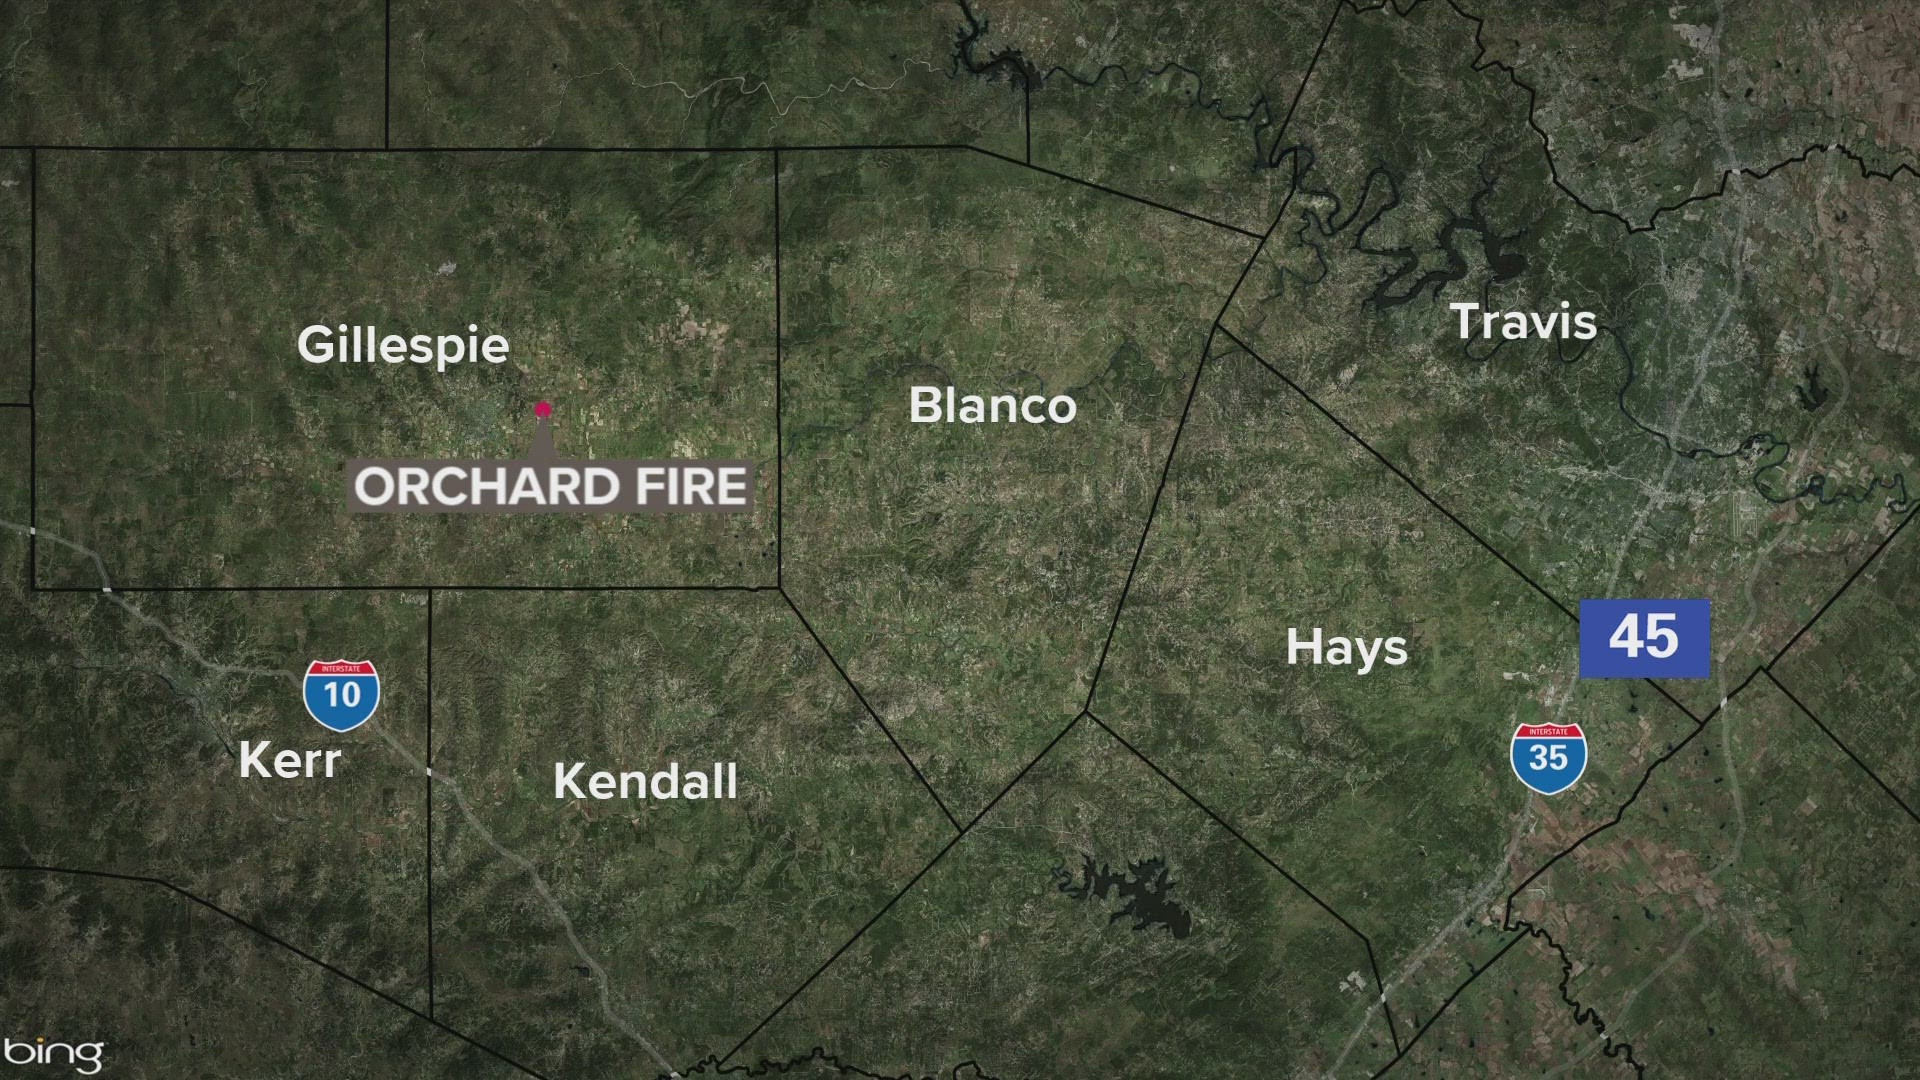 Another wildfire is burning in Gillespie County.